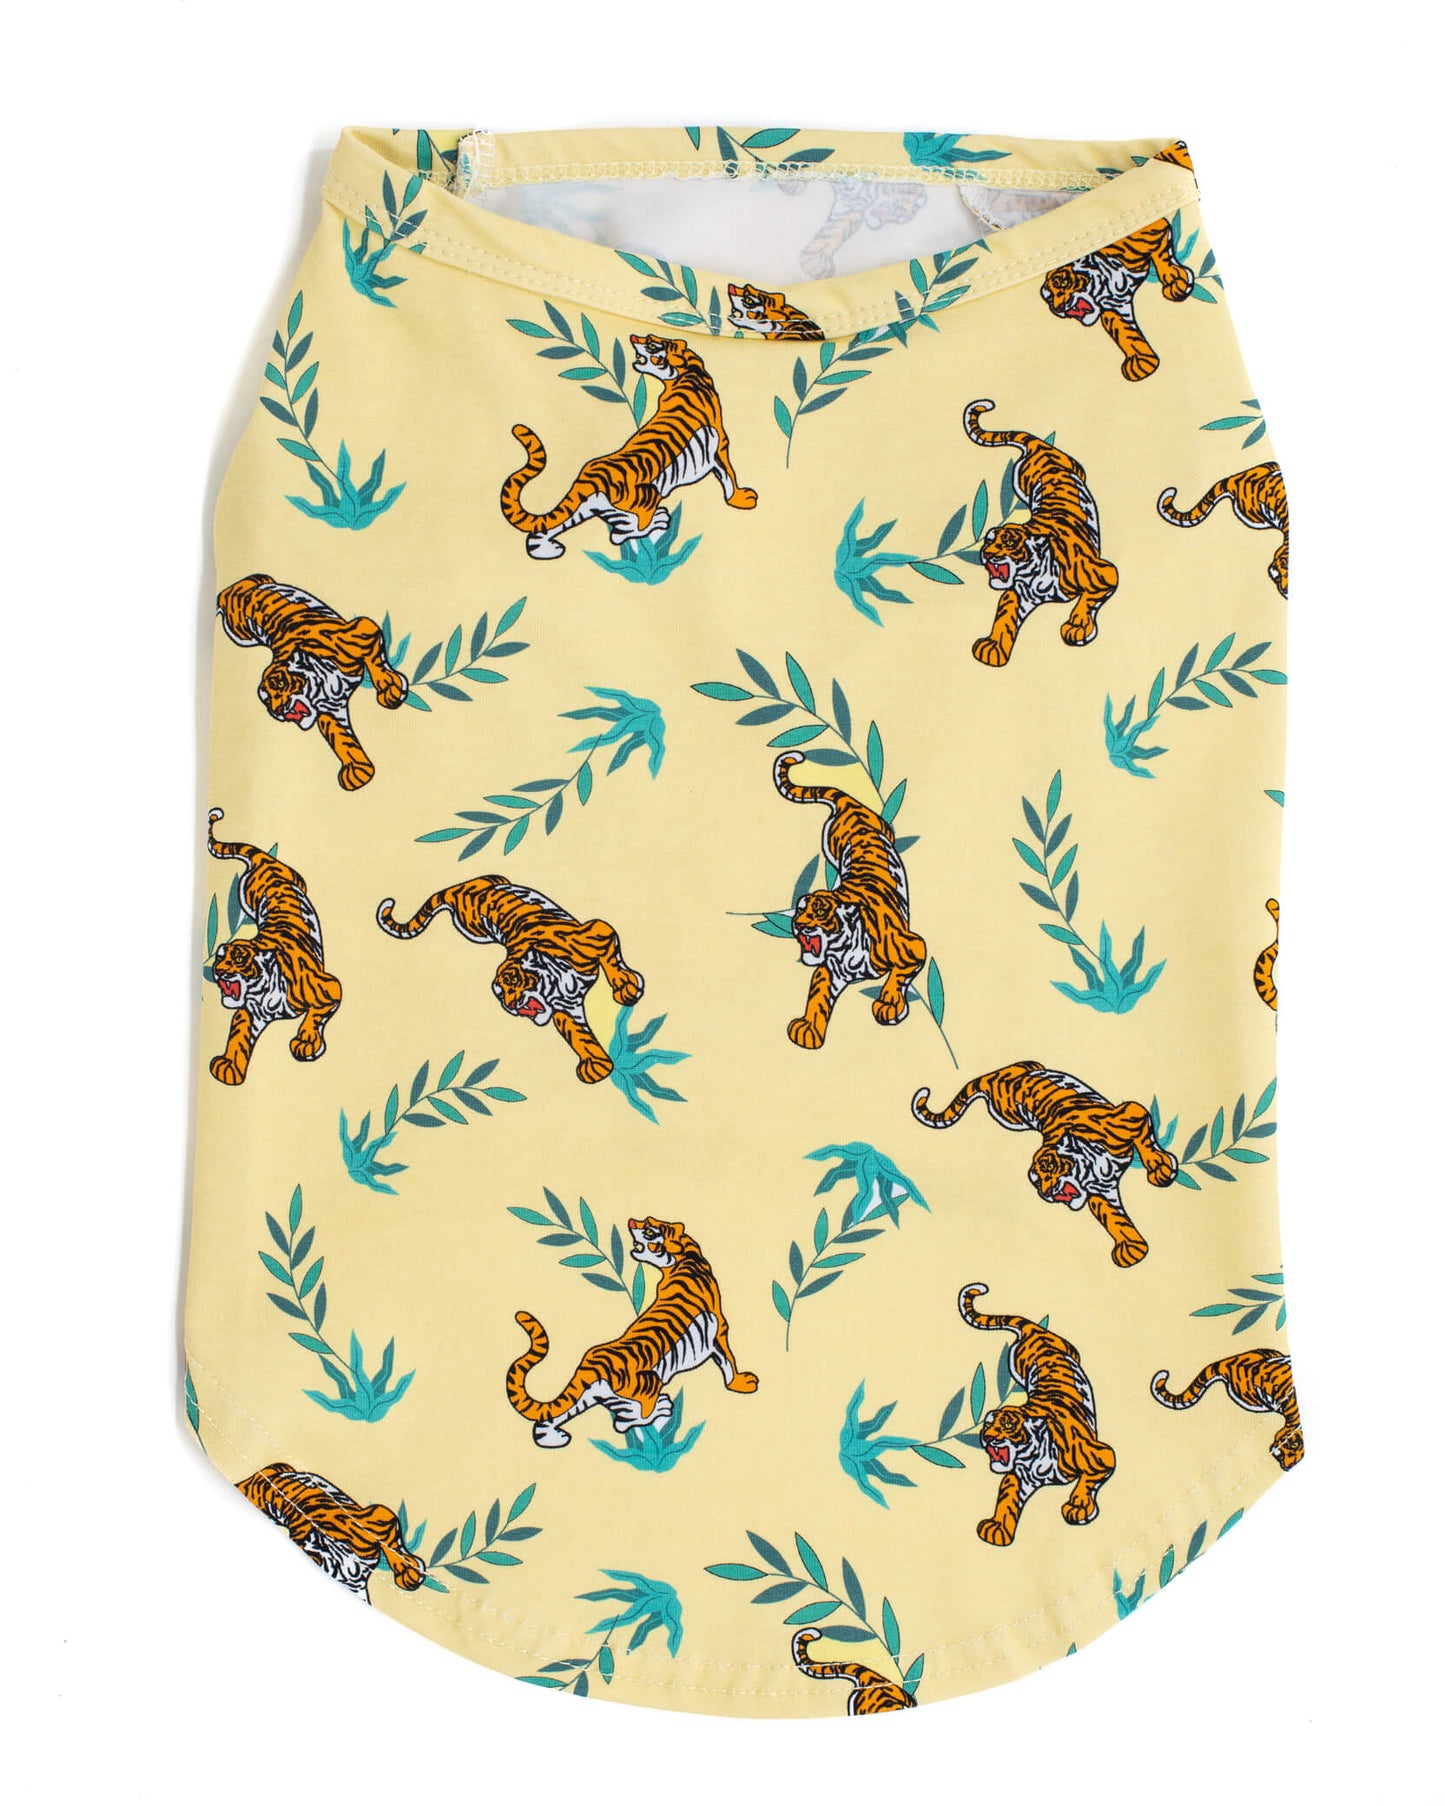 Back of Wild child dog shirt. Printed with Tigers pouncing out of grass. Light yellow shirt for dogs.